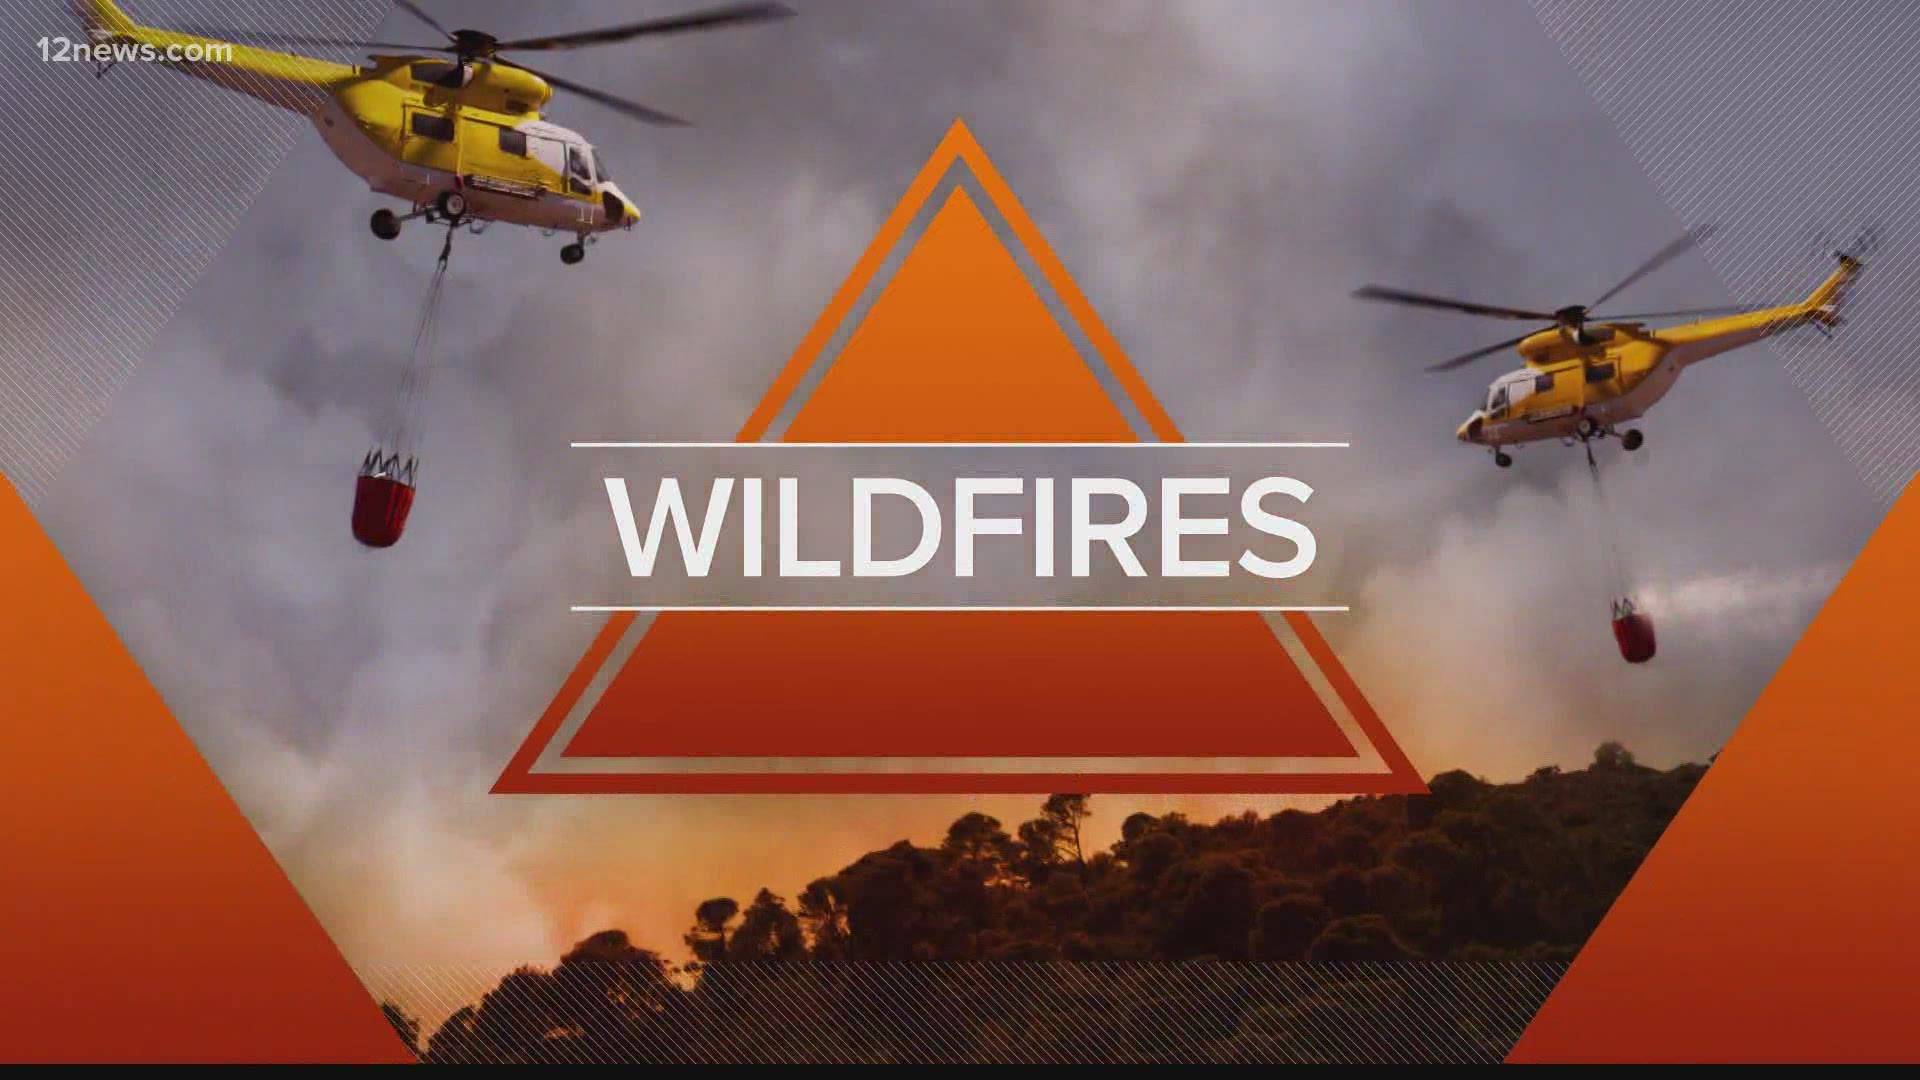 The Telegraph Fire and the Mescal Fire have burned more than 60,000 acres combined in the Tonto National Forest. Multiple communities are gearing up to evacuate.